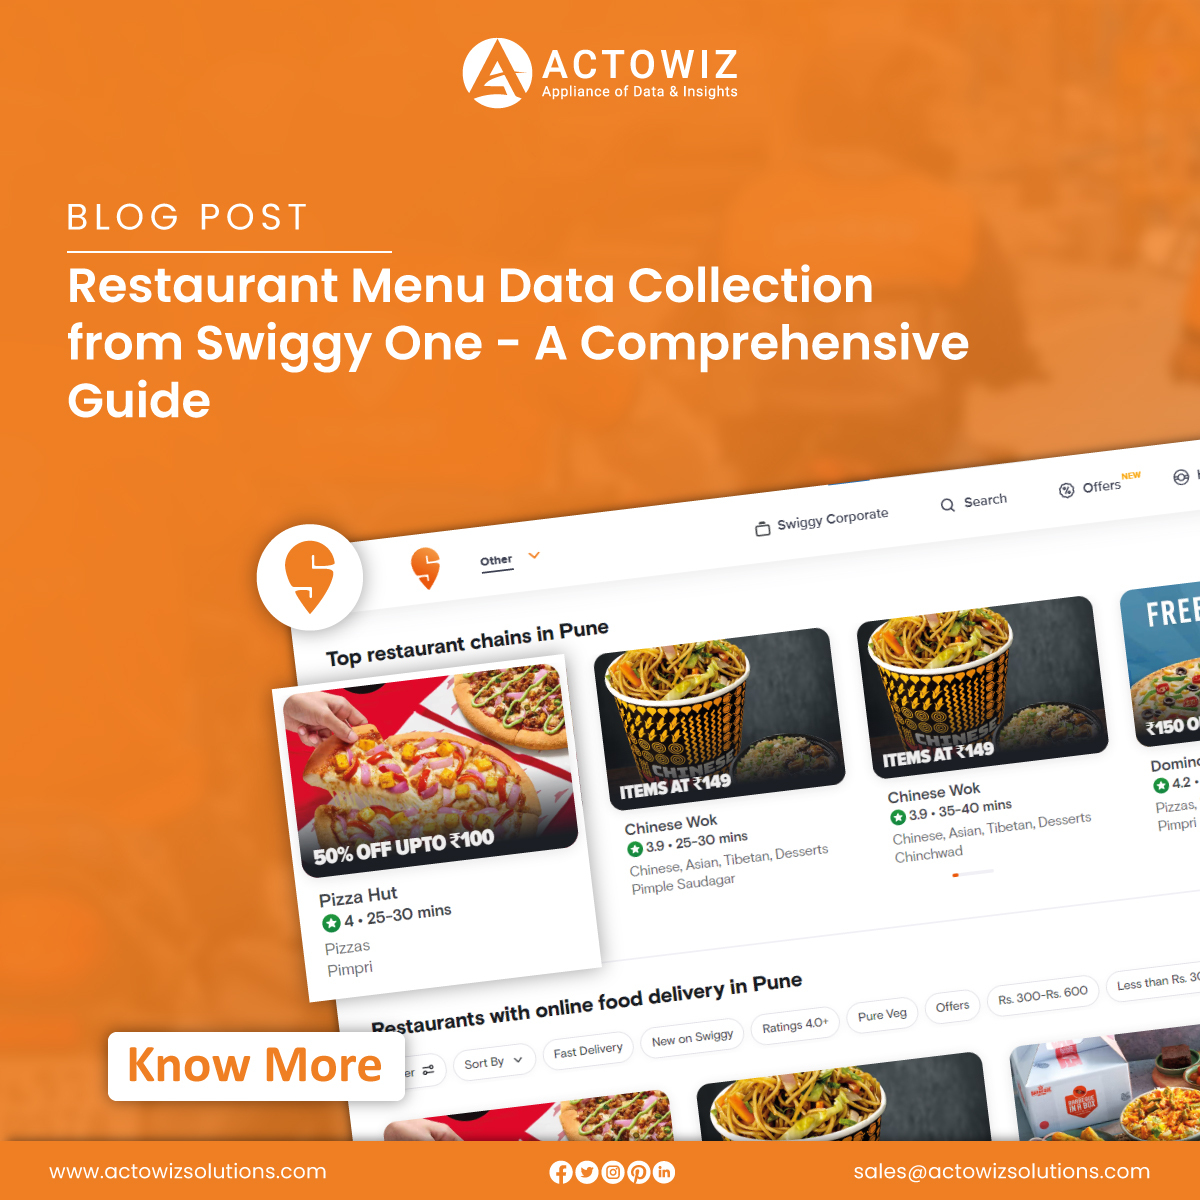 A comprehensive guide on collecting #restaurantmenudatafromSwiggyOne, covering methods, benefits, challenges & best practices. actowizsolutions.com/restaurant-men… #RestaurantmenudatascrapingfromSwiggy #ScrapeRestaurantmenudatafromSwiggy #ScrapeSwiggyOneData #DataCollection #USA #UK #UAE